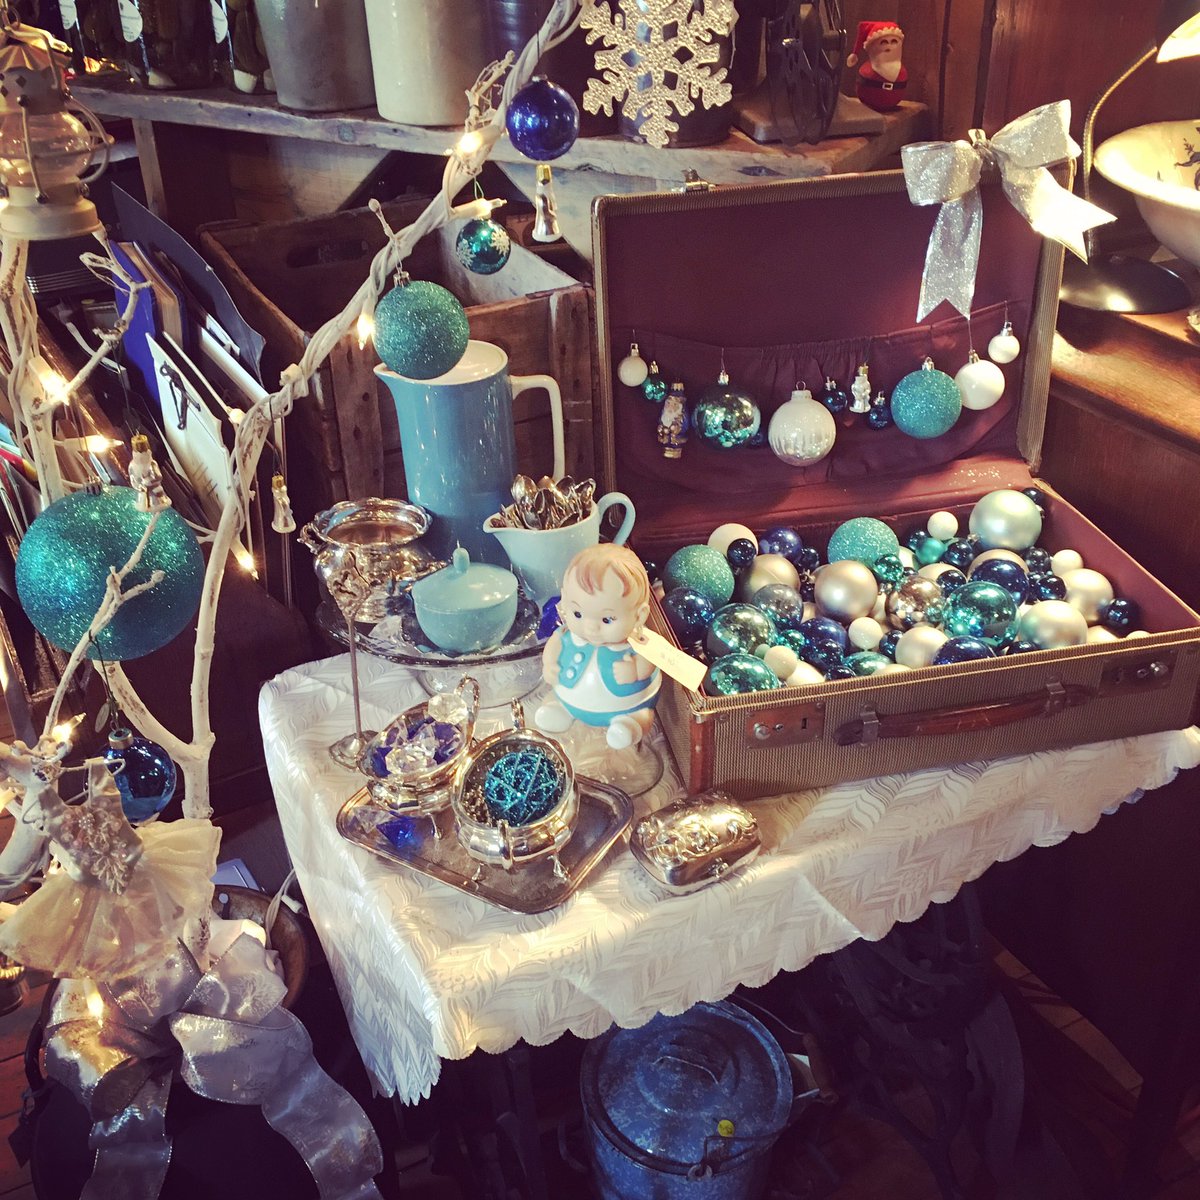 We’ve got lots of decor for the Holidays and we are open 11-6 today. #decorations #decor #interiors #christmas #deckthehalls #trimthetree #socialenterprise